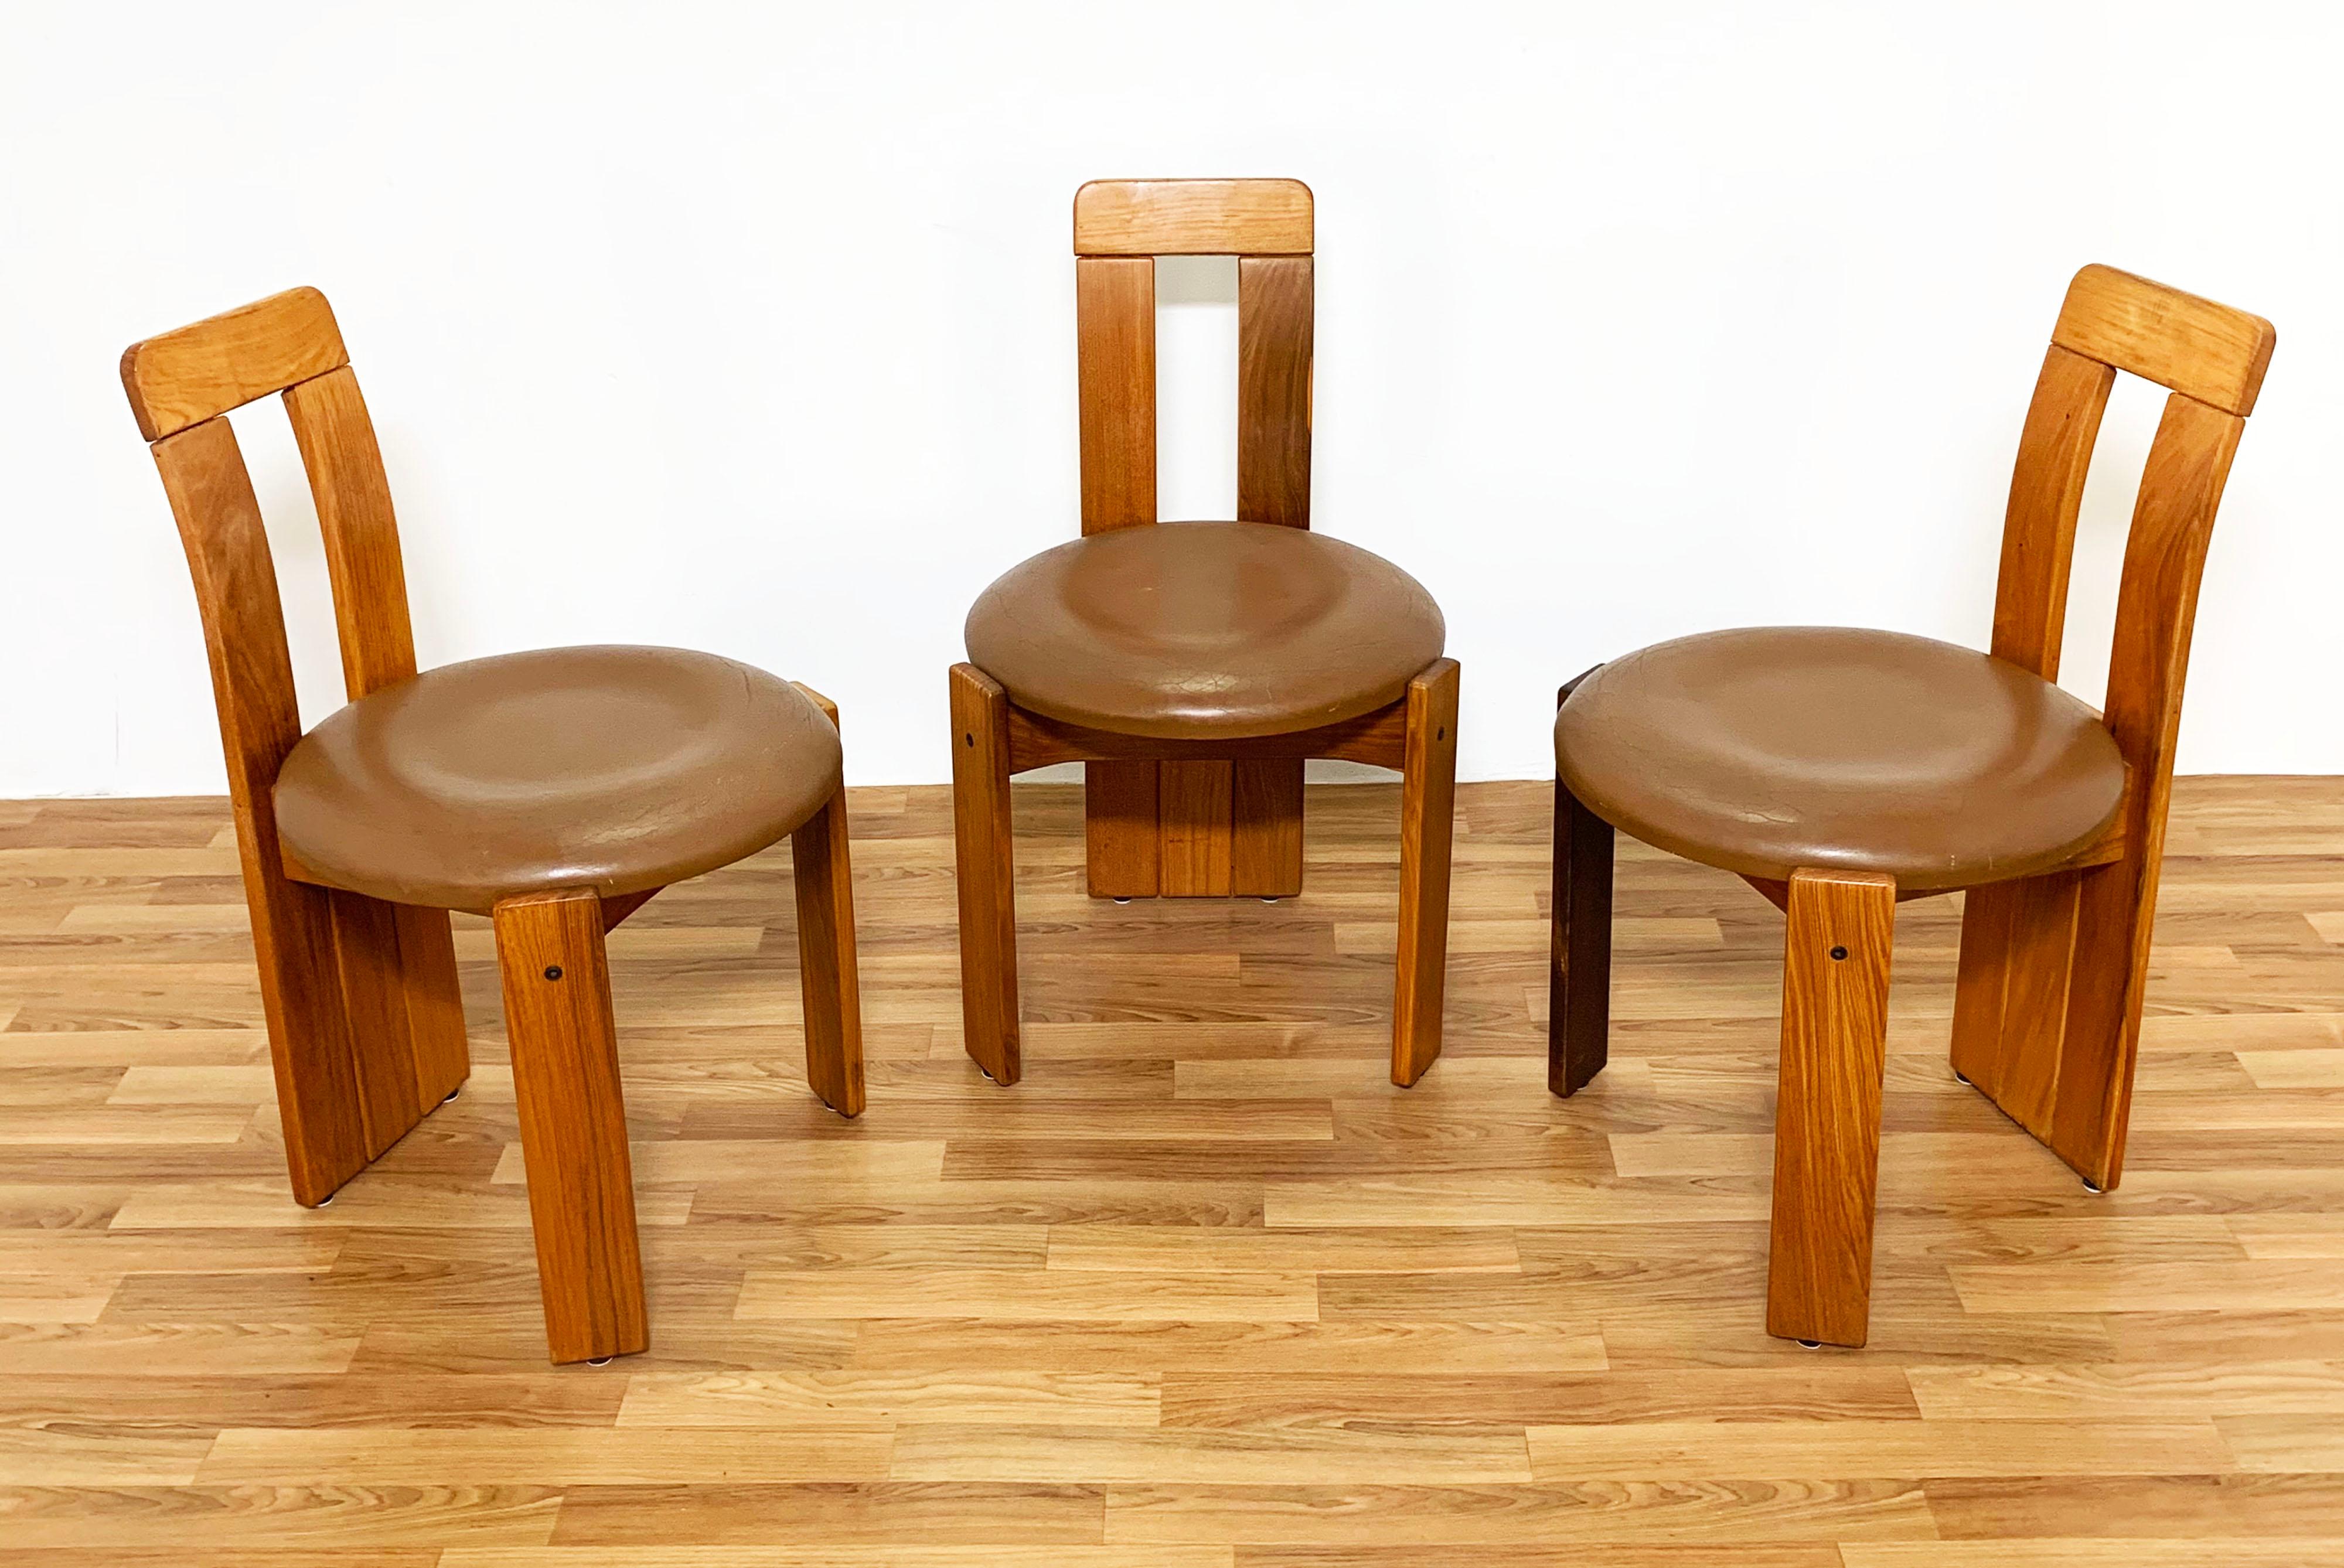 A set of three dining chairs with tripod legs and circular leather seats, circa 1970s. Unmarked, but bear a striking resemblance to the work of either Carlo Scarpa or the prolific team of his son and daughter-in-law, Tobia and Afra.